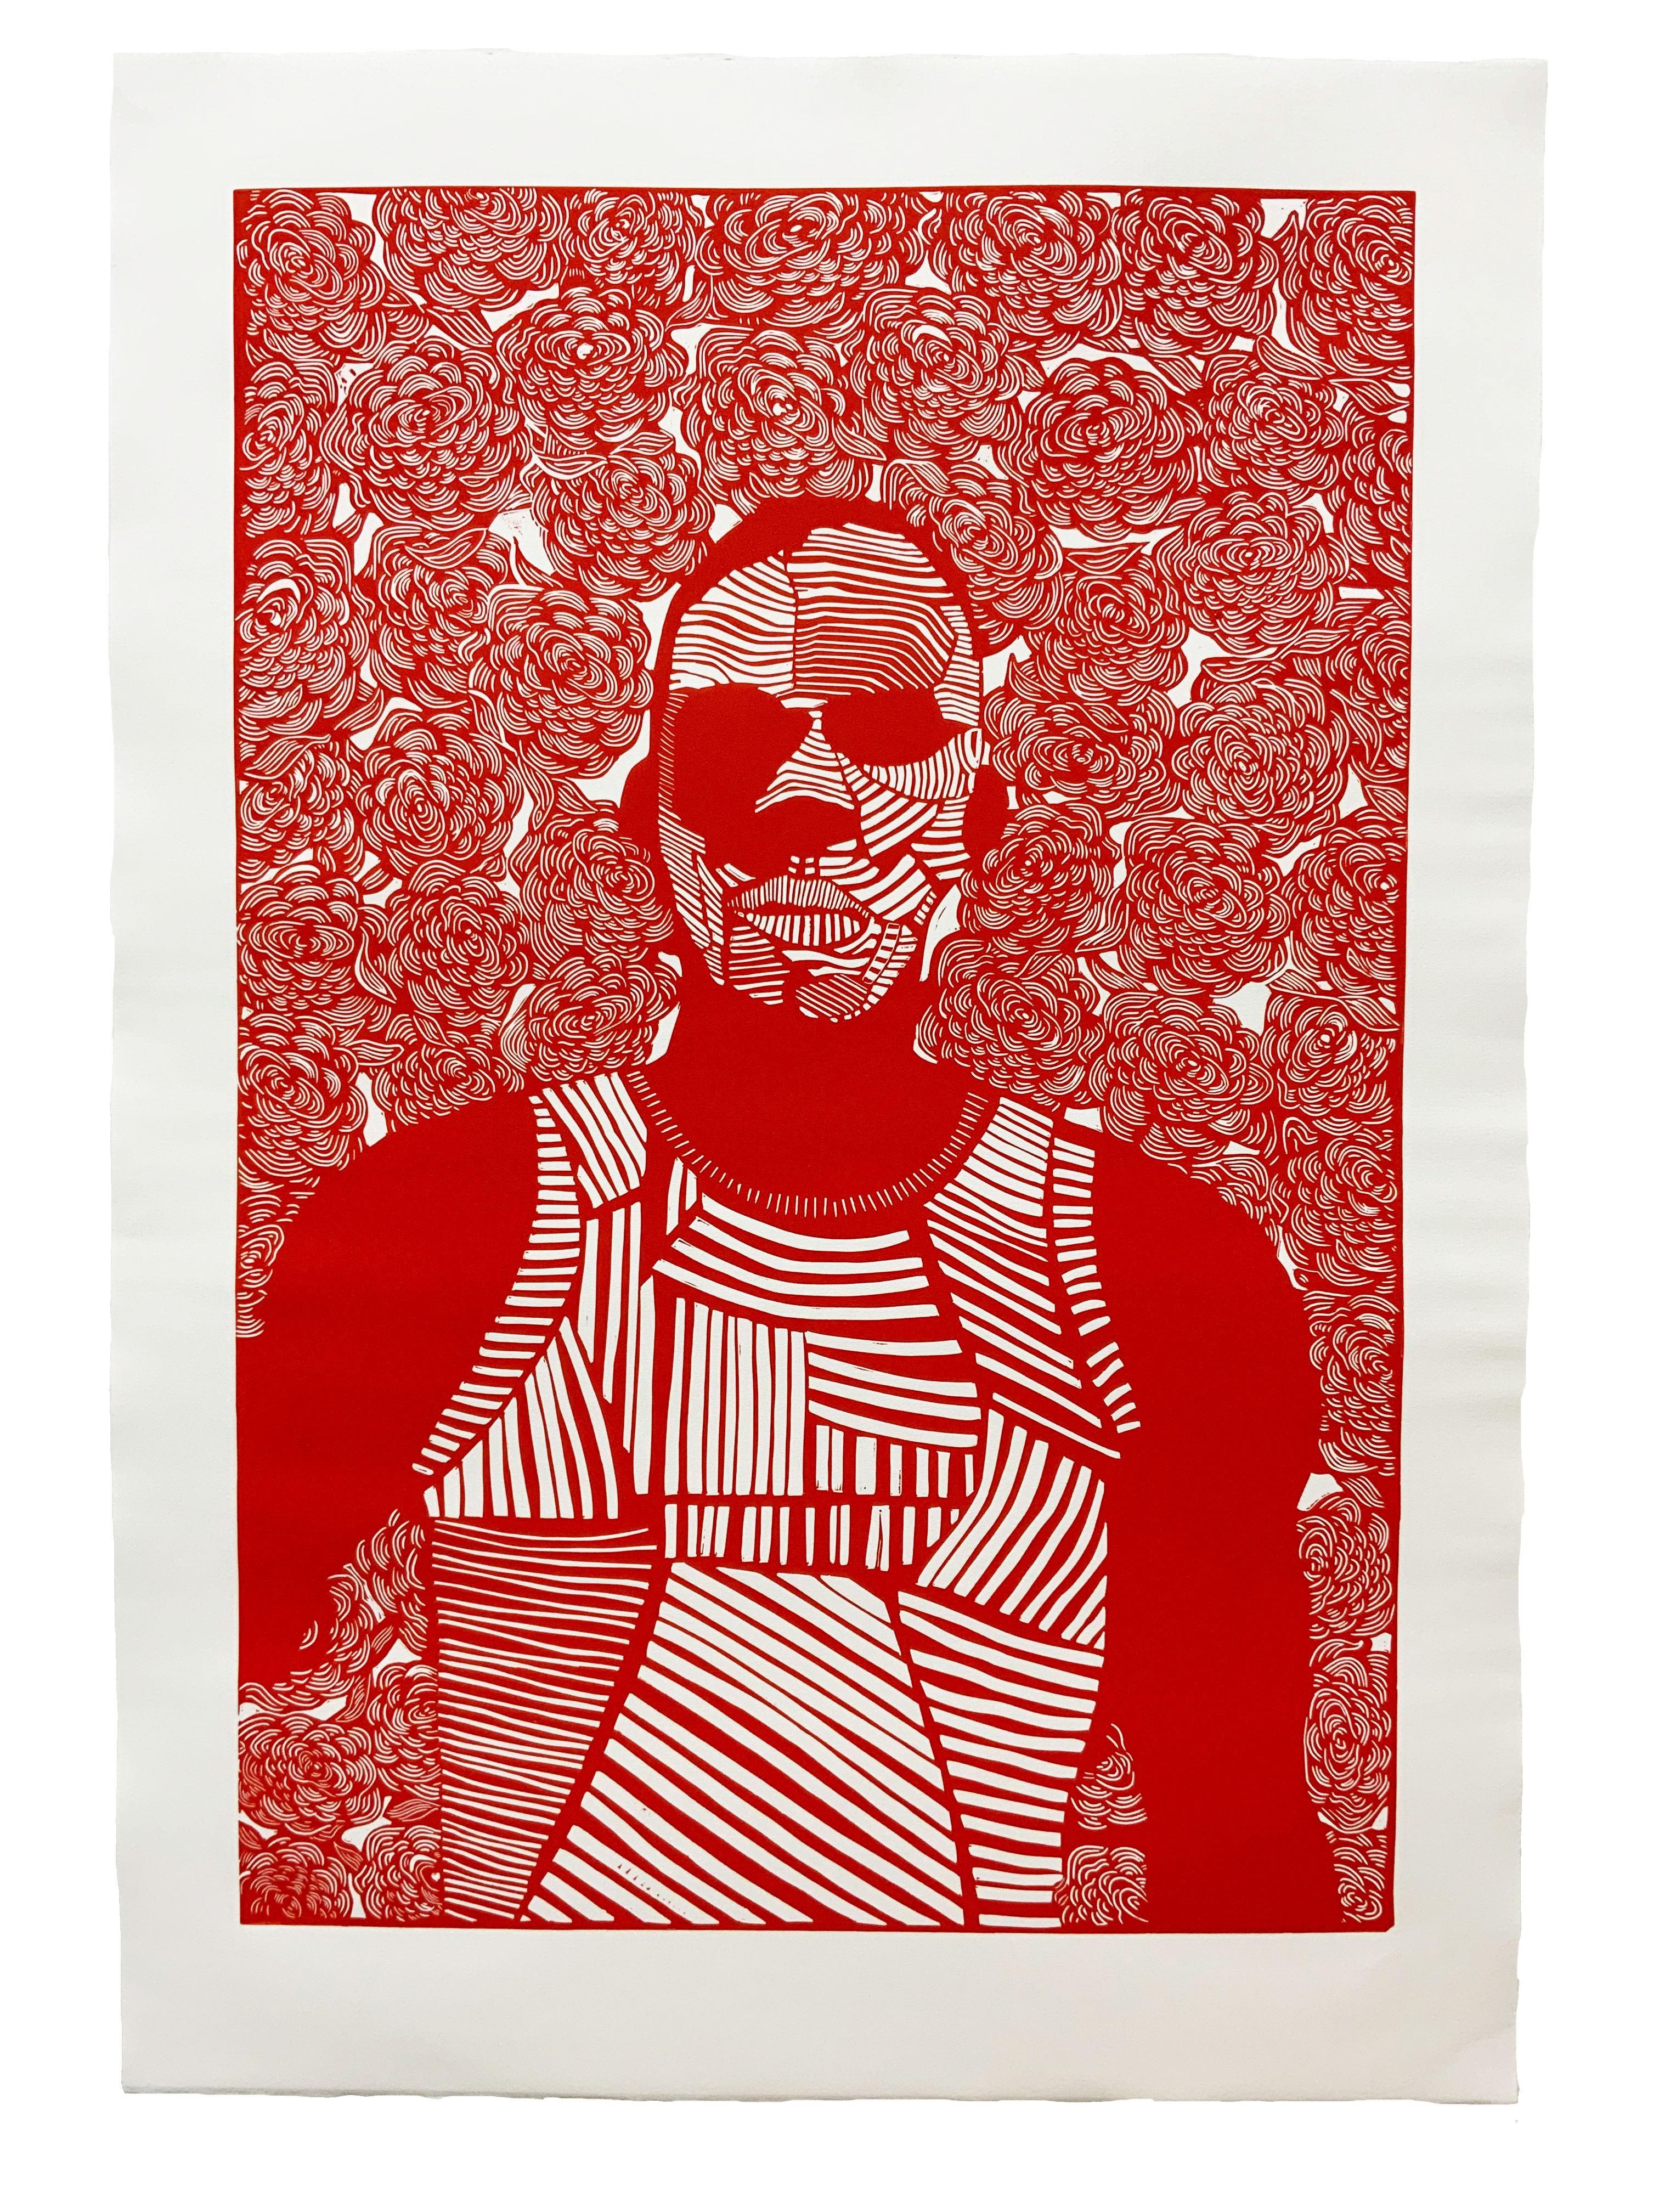 "Man with Flowers"  Contemporary, red, pattern, portrait, floral, graphic, print